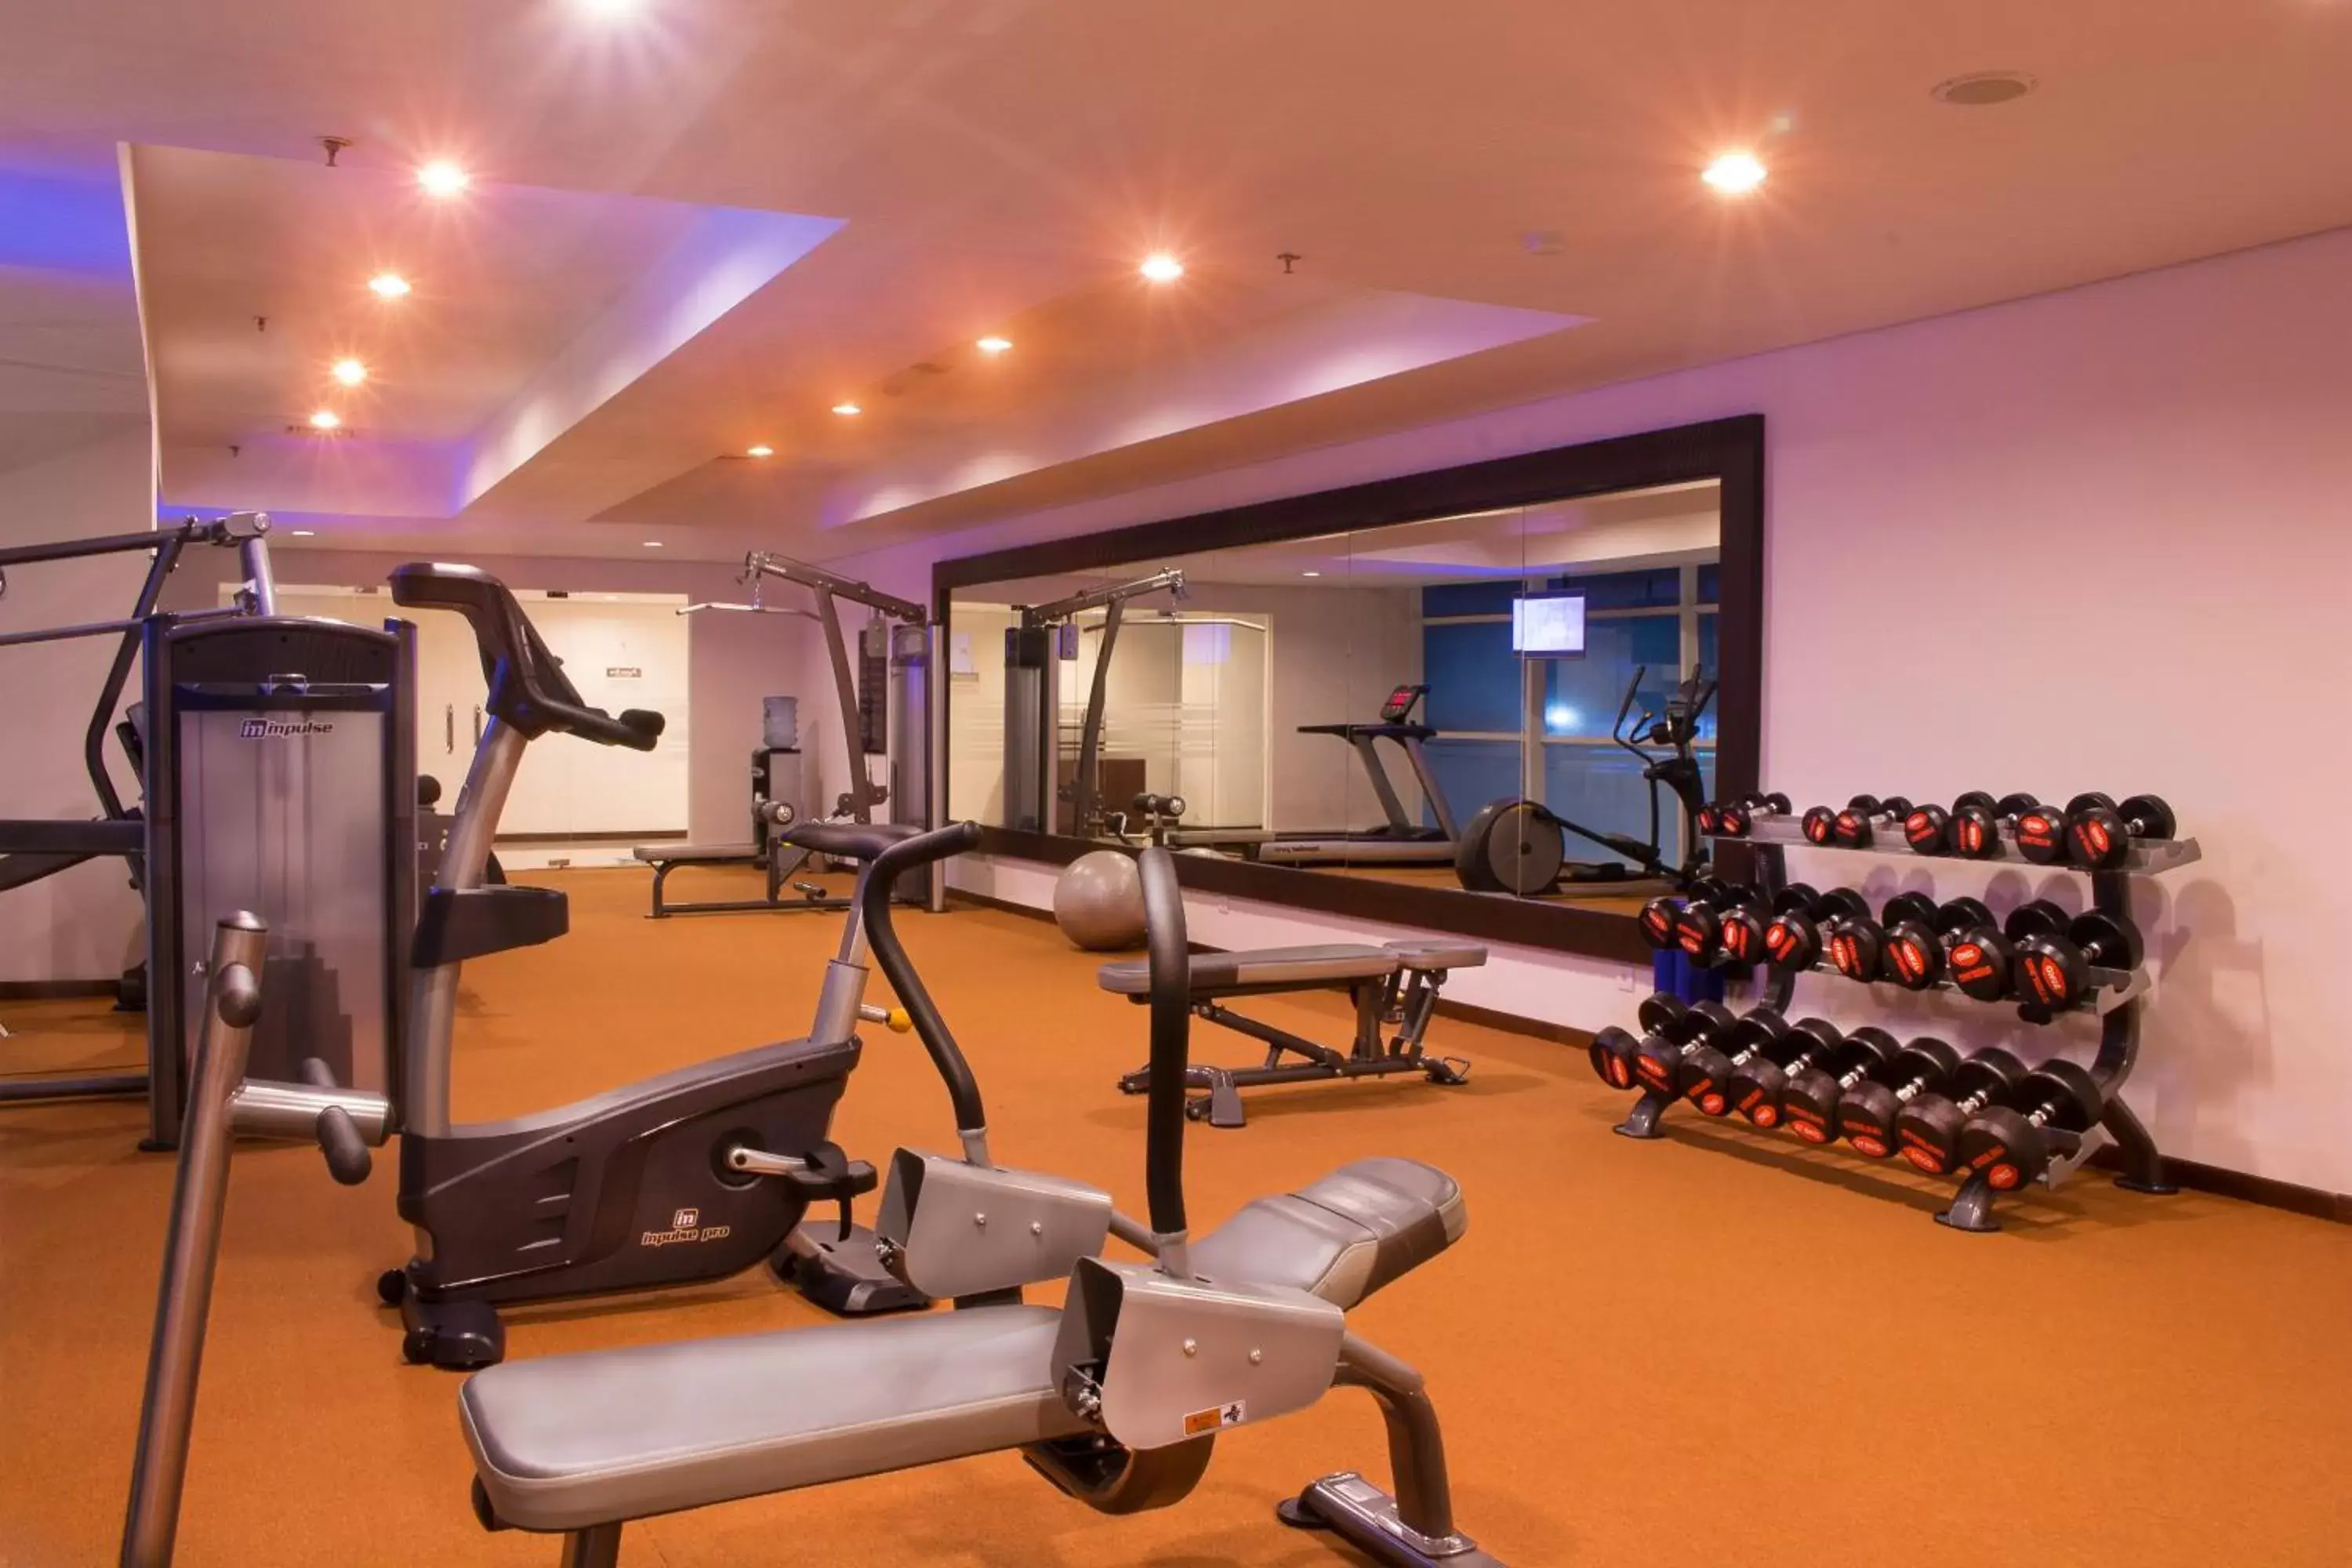 Fitness centre/facilities, Fitness Center/Facilities in Best Western Plus Coco Palu